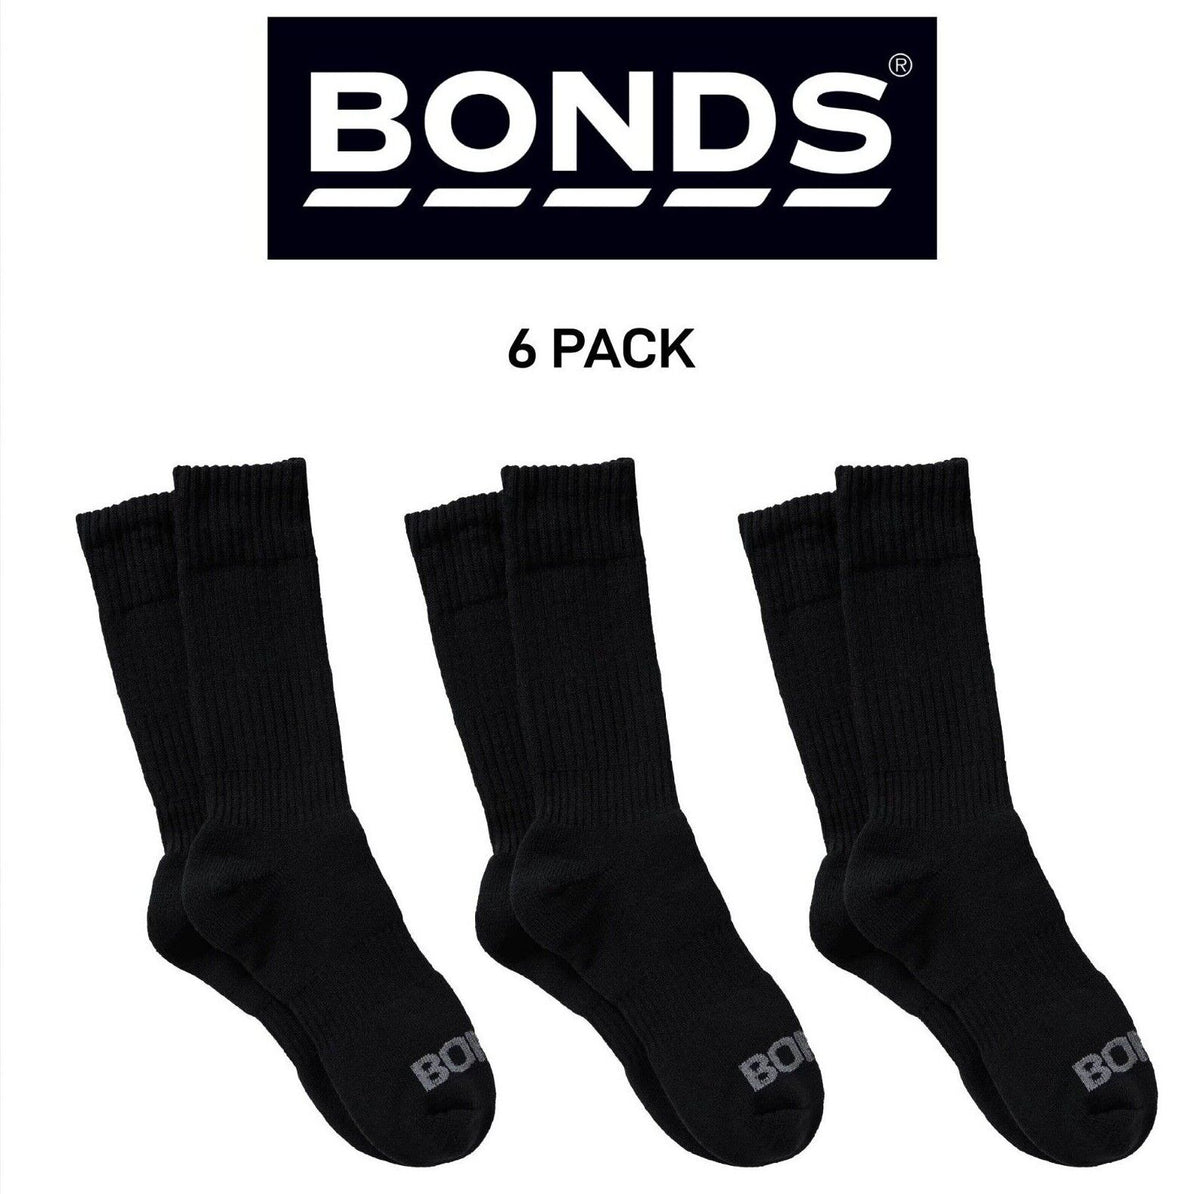 Bonds Mens Cotton Work Socks Durable Comfort and Warmth Fit 6 Pack SYPG2N